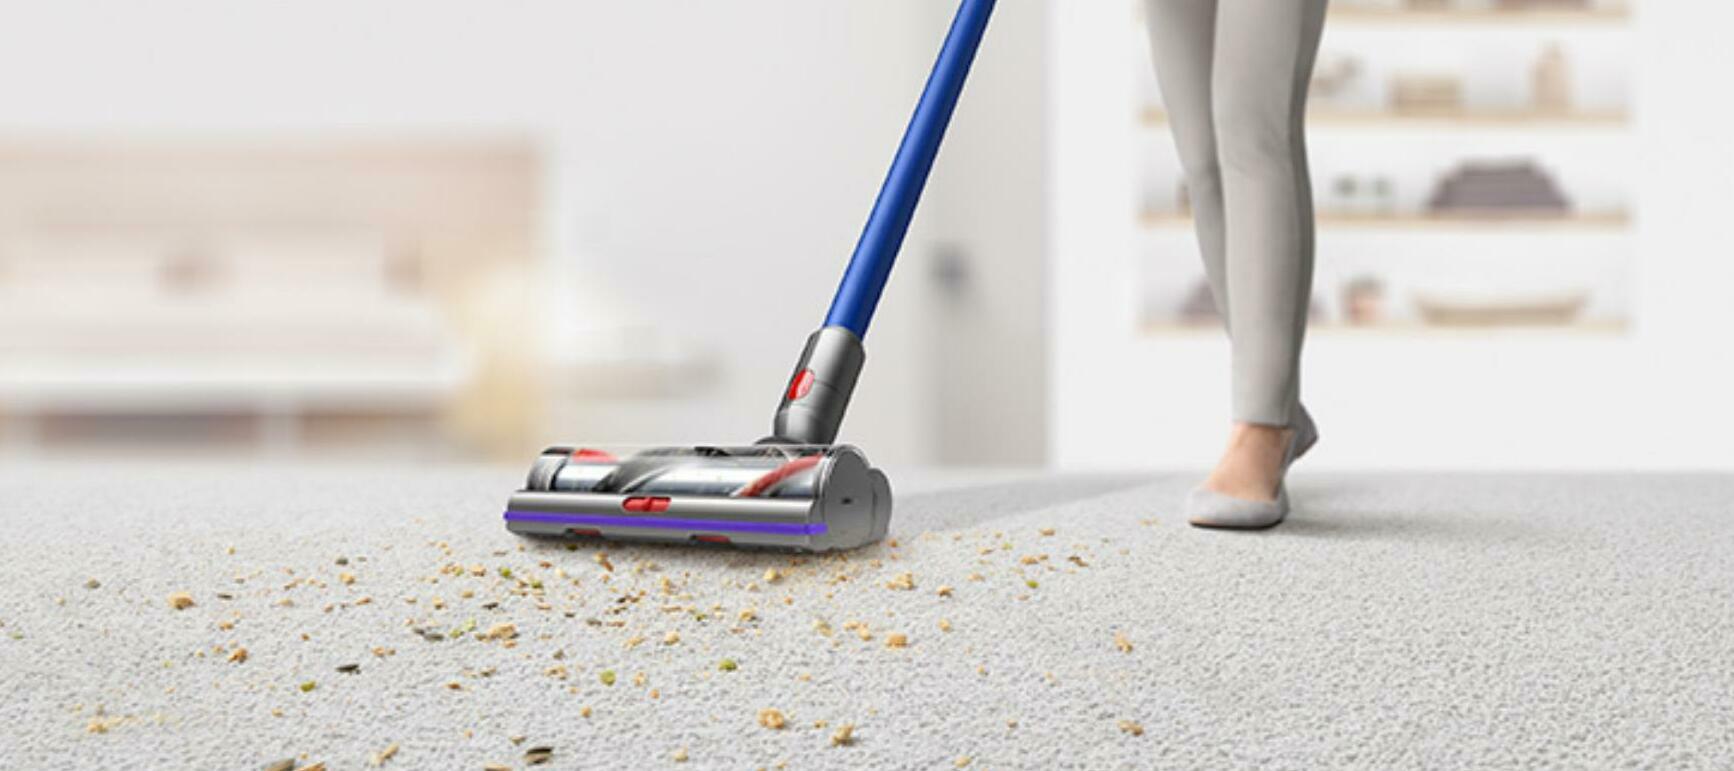 How to: Clean carpets, remove stains and which accessories to use